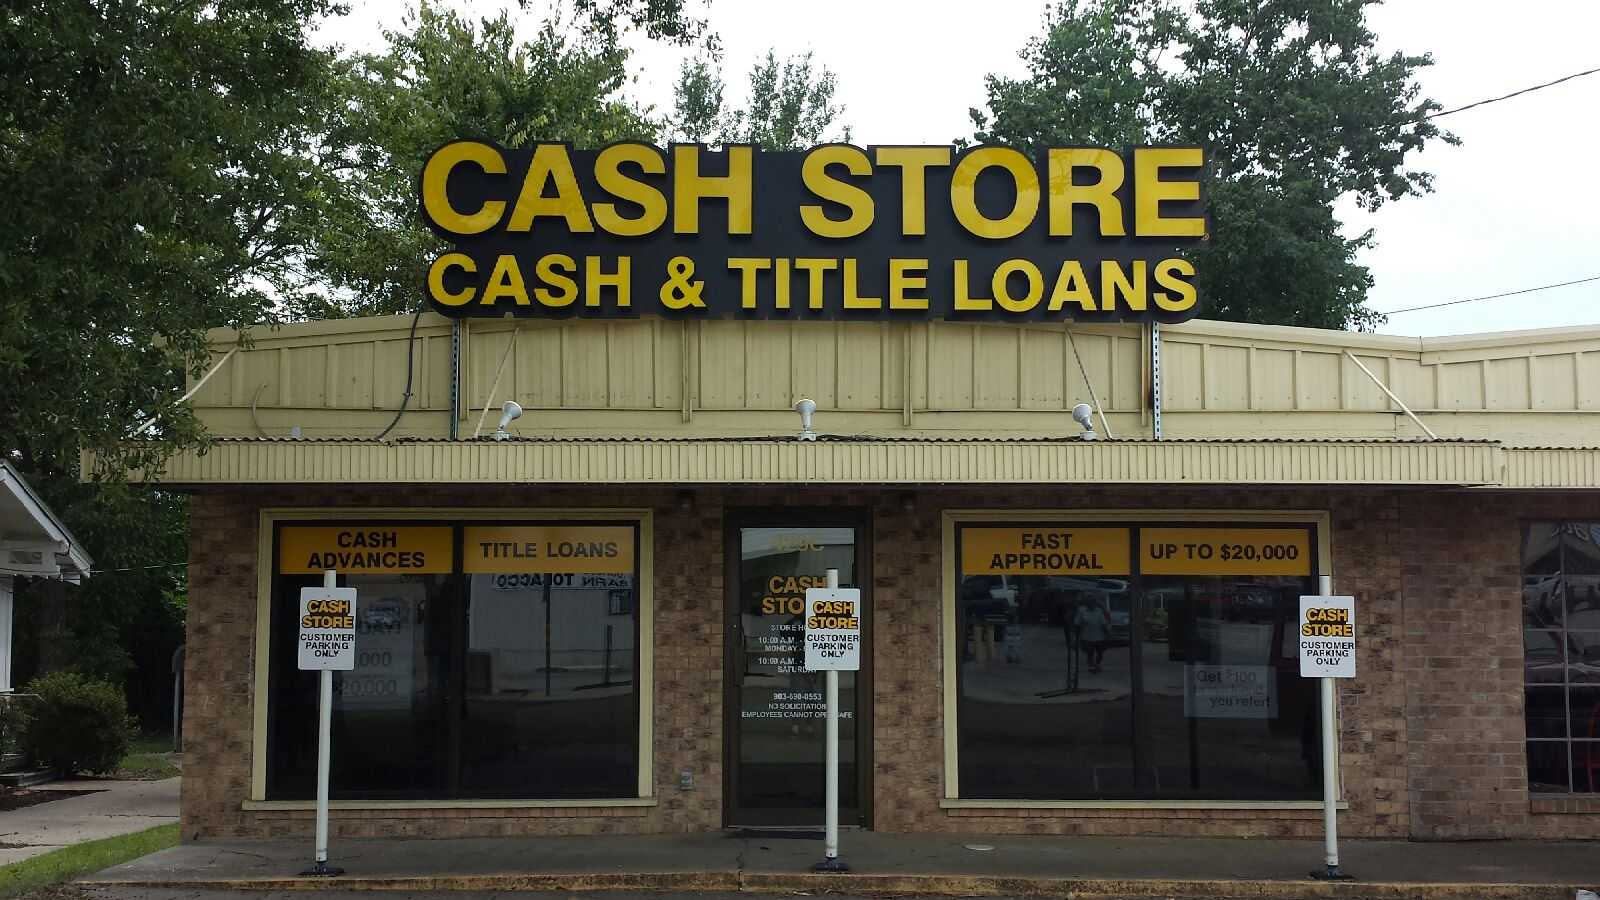 The Cash Store -  #7503